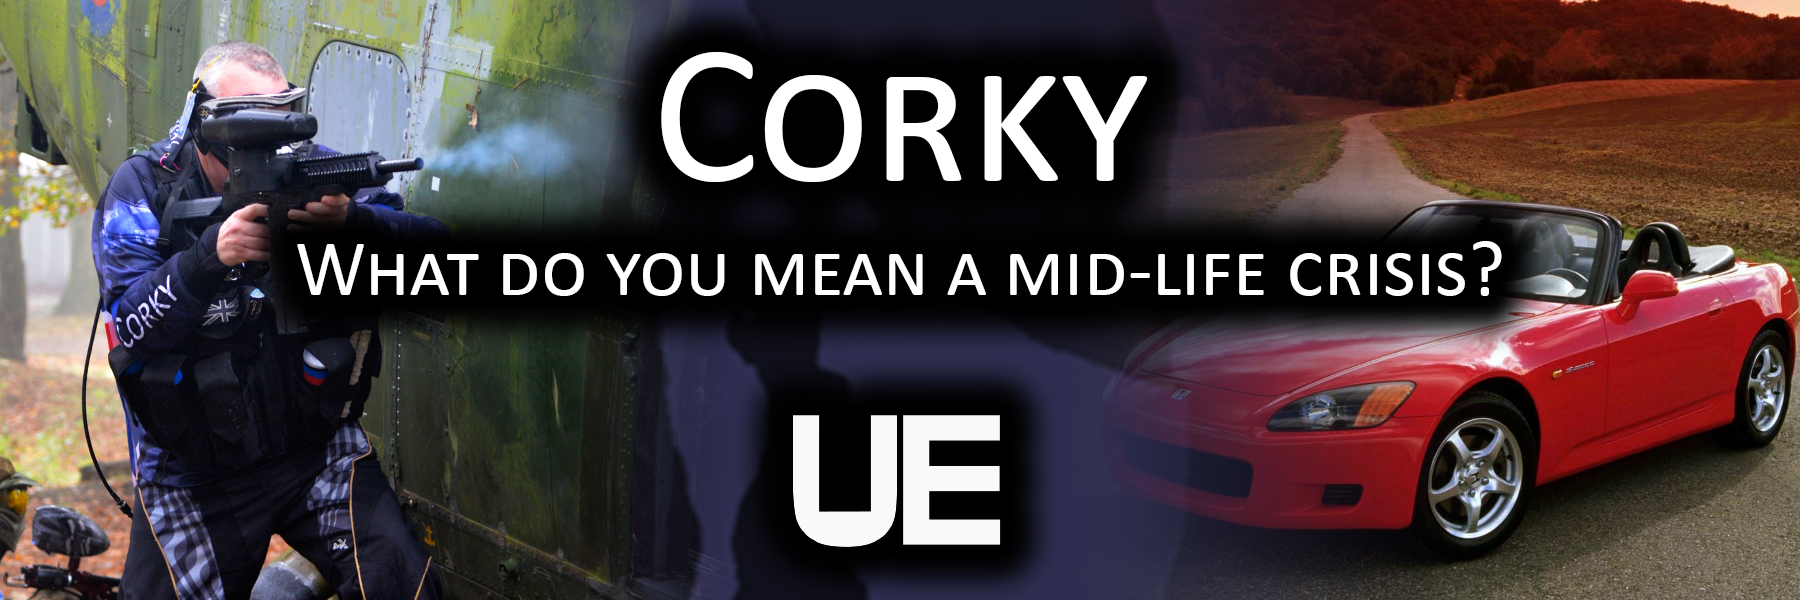 Corky | What do you mean a midlife crisis?